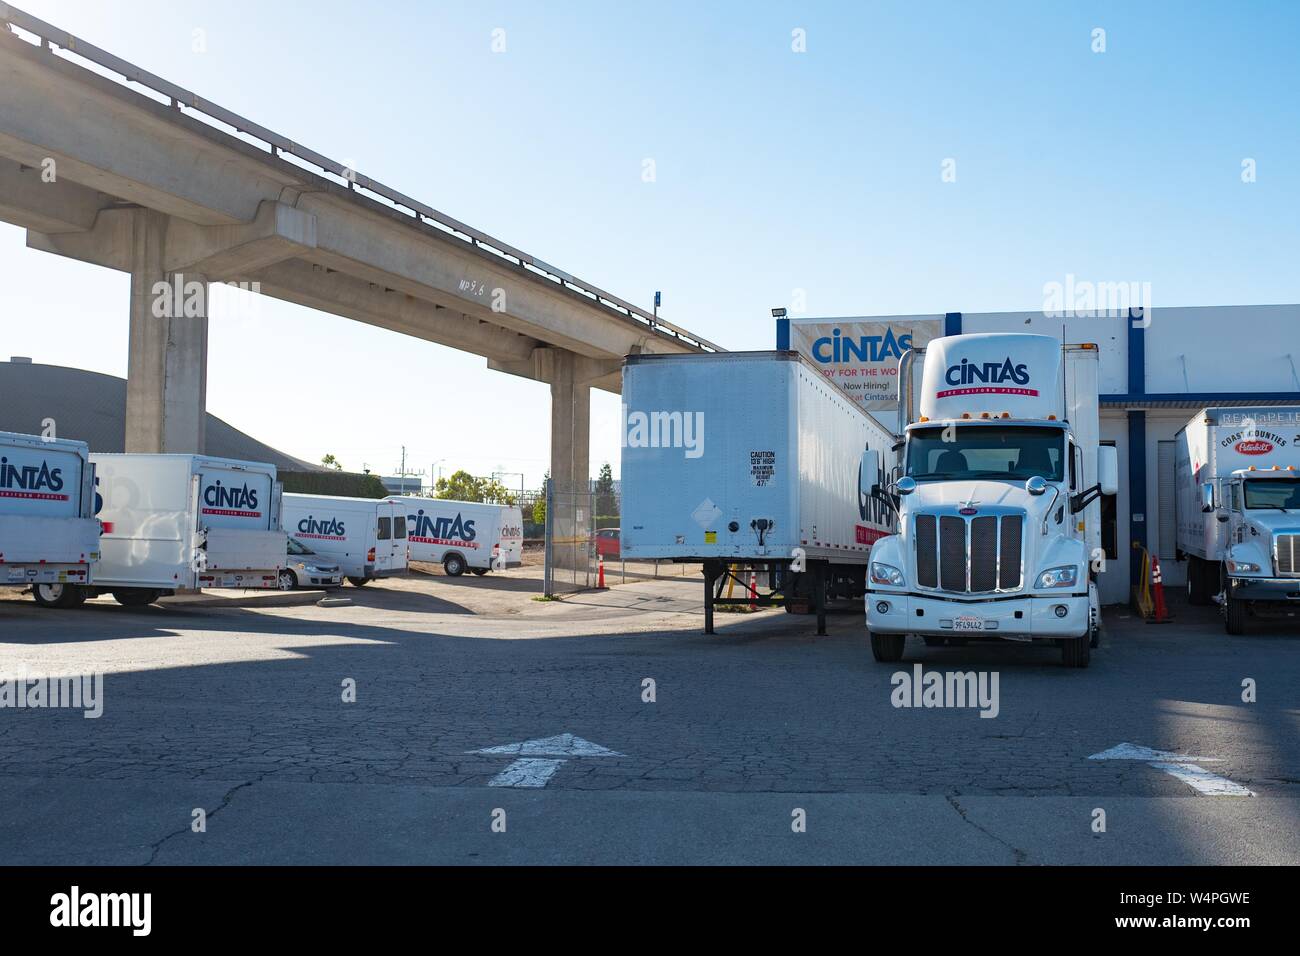 Delivery vehicles and tractor trailers with logos are visible at local distribution center for Cintas uniform delivery service in San Leandro, California, September 10, 2018. () Stock Photo